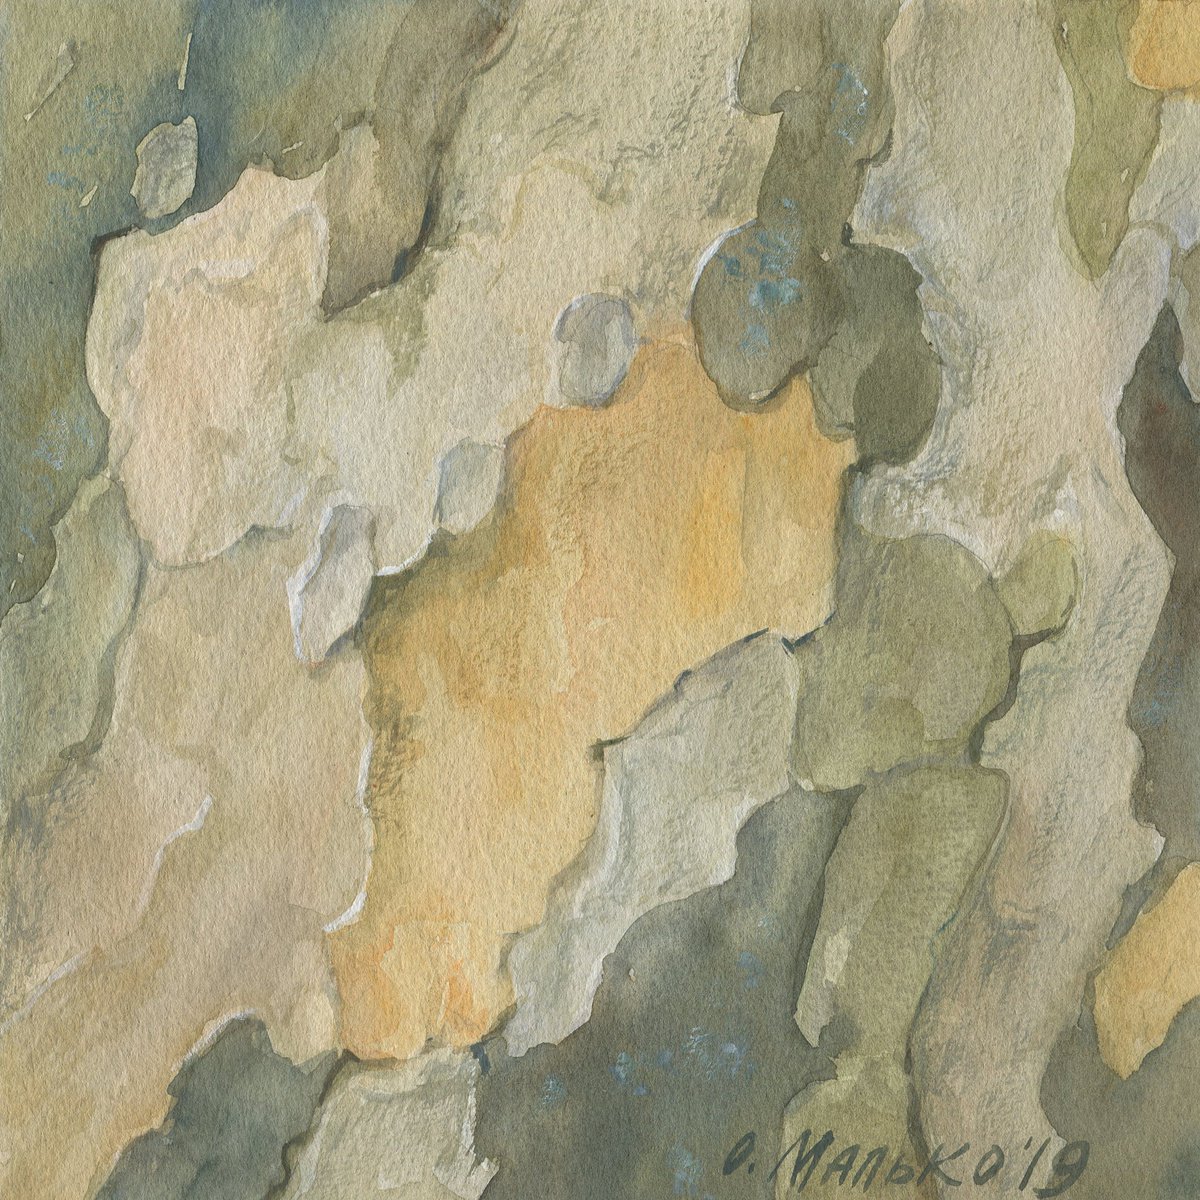 Big routes of little insects #1. Sycamore tree bark / Original watercolor Small size by Olha Malko